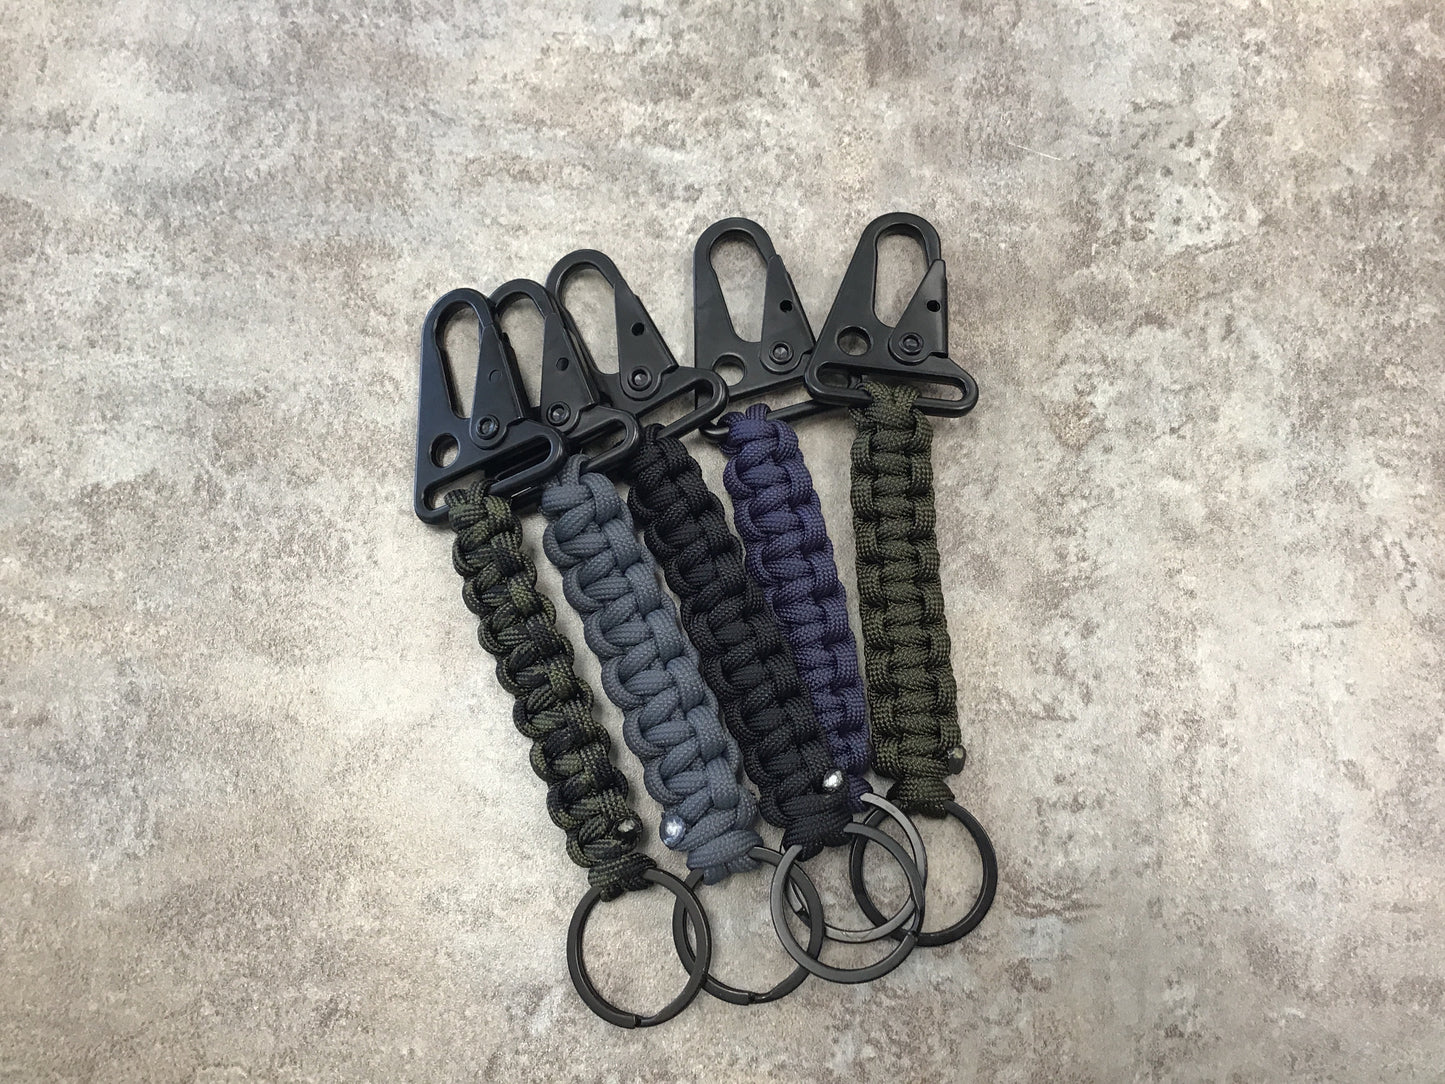 KH-30 Paracord/Sling Hook Keychain